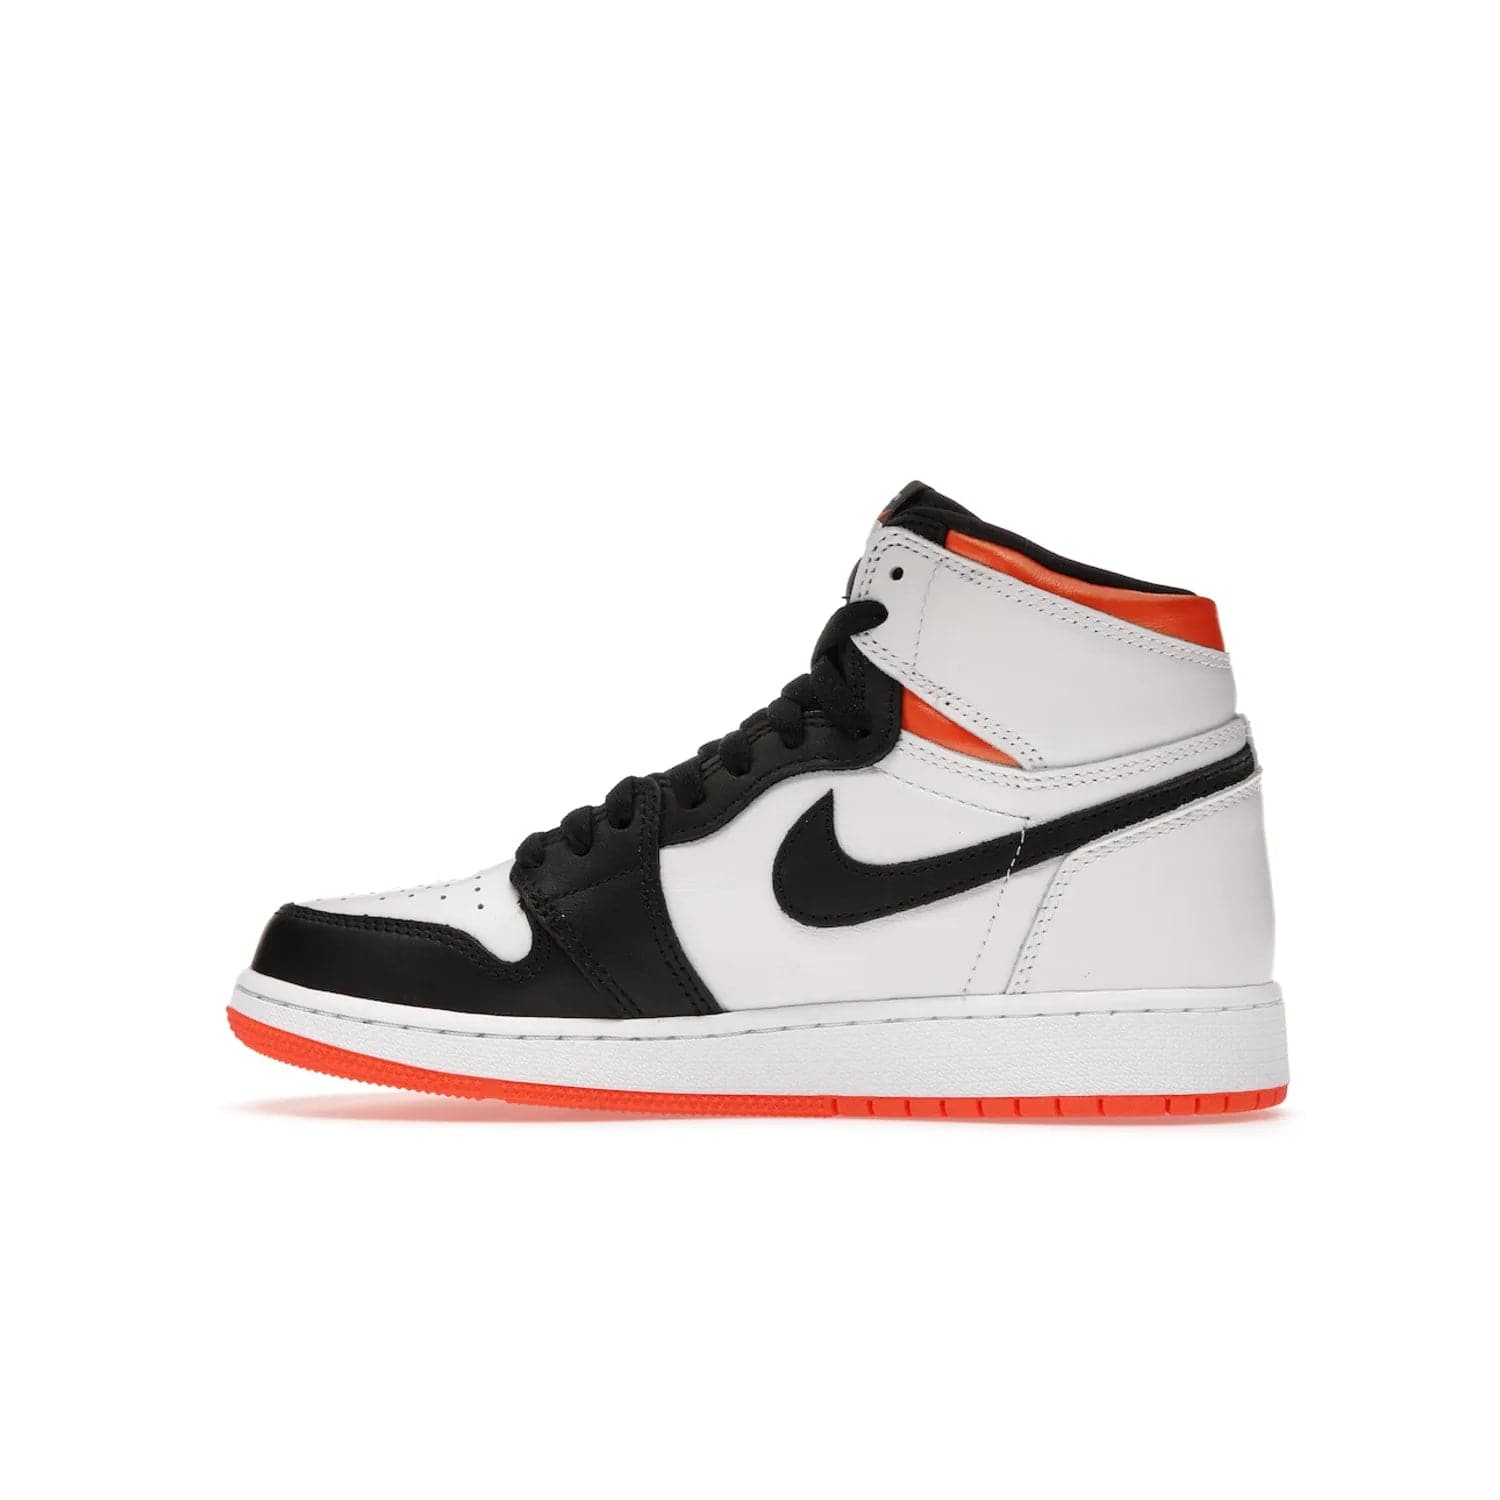 Jordan 1 High OG Electro Orange (GS) - Image 20 - Only at www.BallersClubKickz.com - The Air Jordan 1 High OG Electro Orange GS is the ideal shoe for kids on the go. Featuring white leather uppers, black overlays, and bright orange accents, it's sure to become a favorite. A great mix of classic style and vibrant colors, the shoe delivers air cushioning for comfort and hard orange rubber for grip. Release on July 17th, 2021. Get them a pair today.